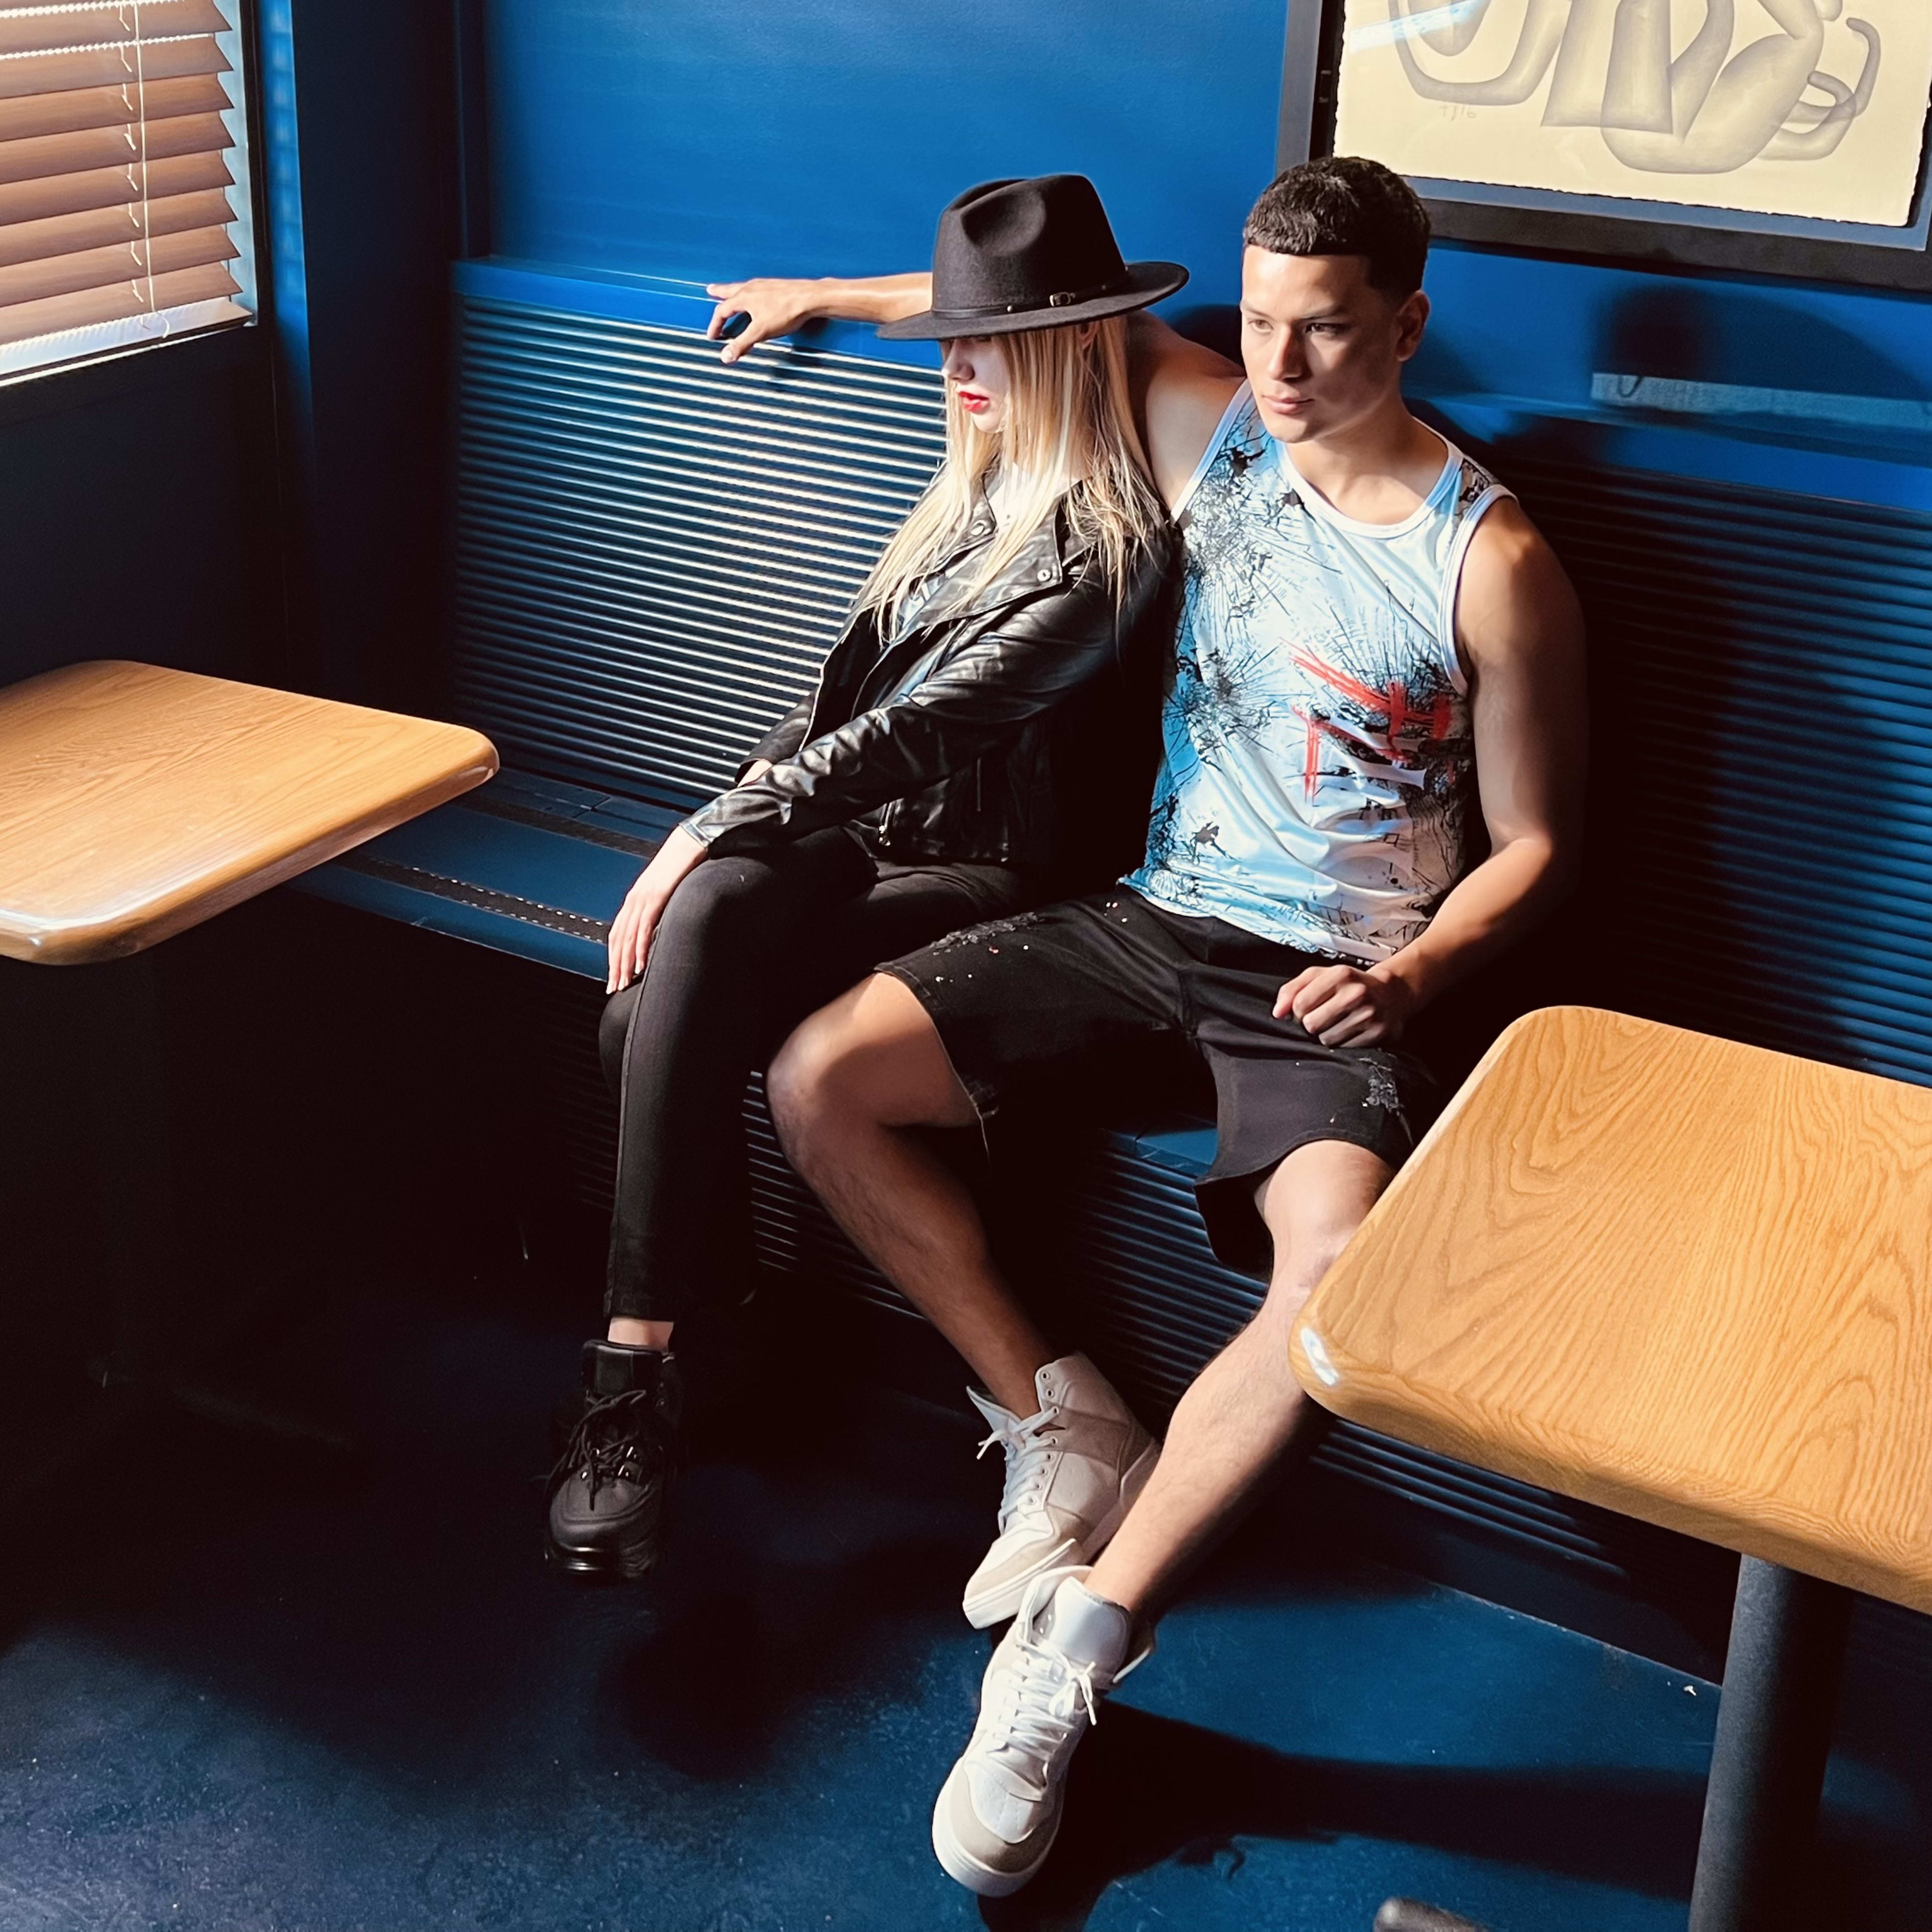 A fashion photoshoot with a man and a woman sitting on a blue bench in a restaurant.